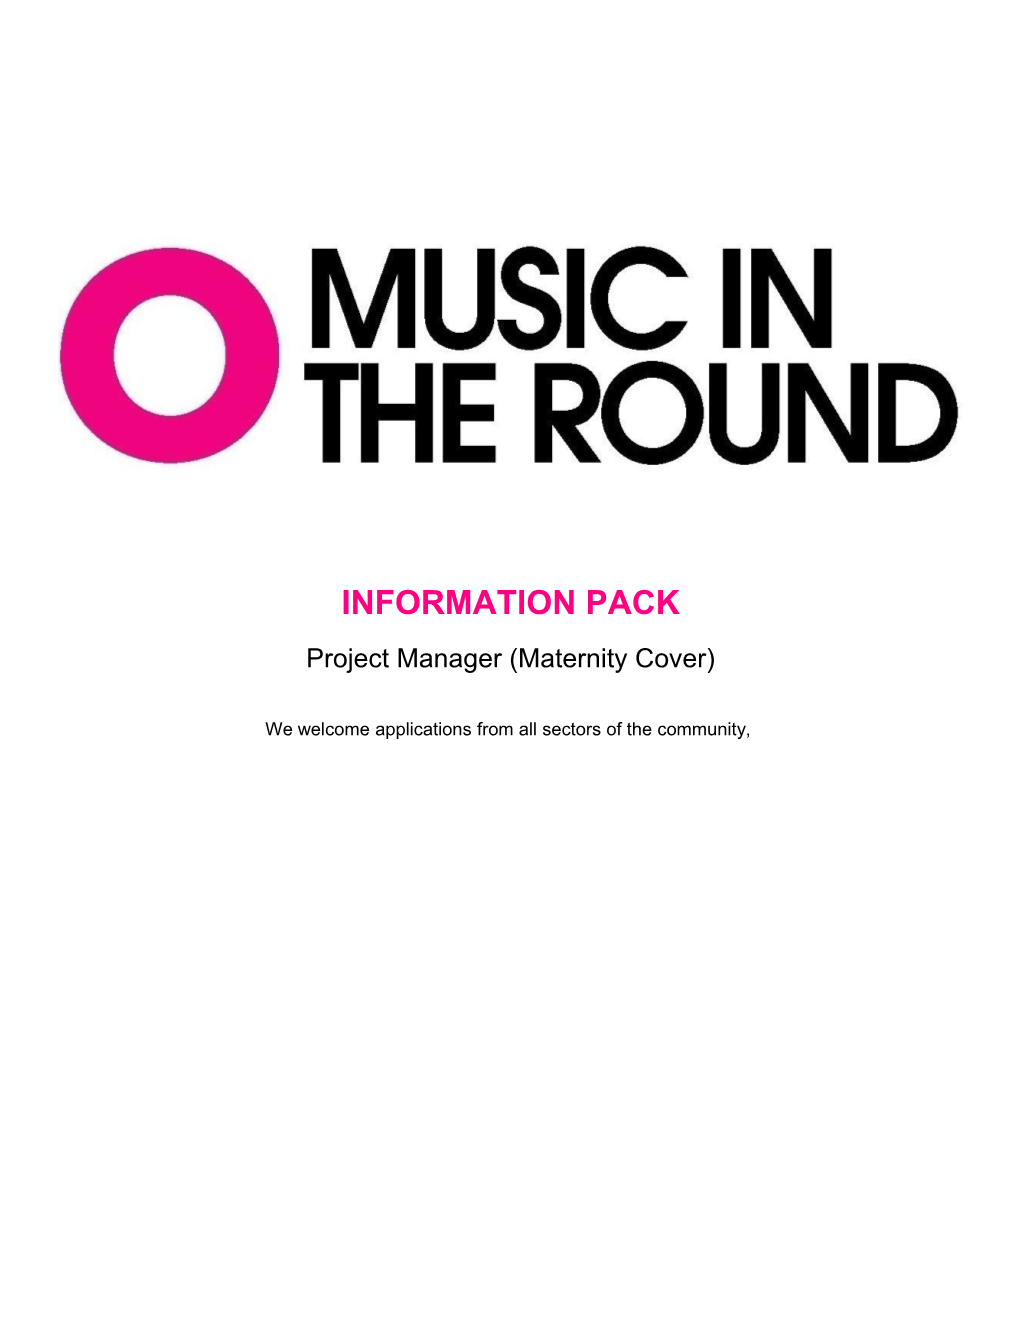 Feedback and Endorsements for Music in the Round